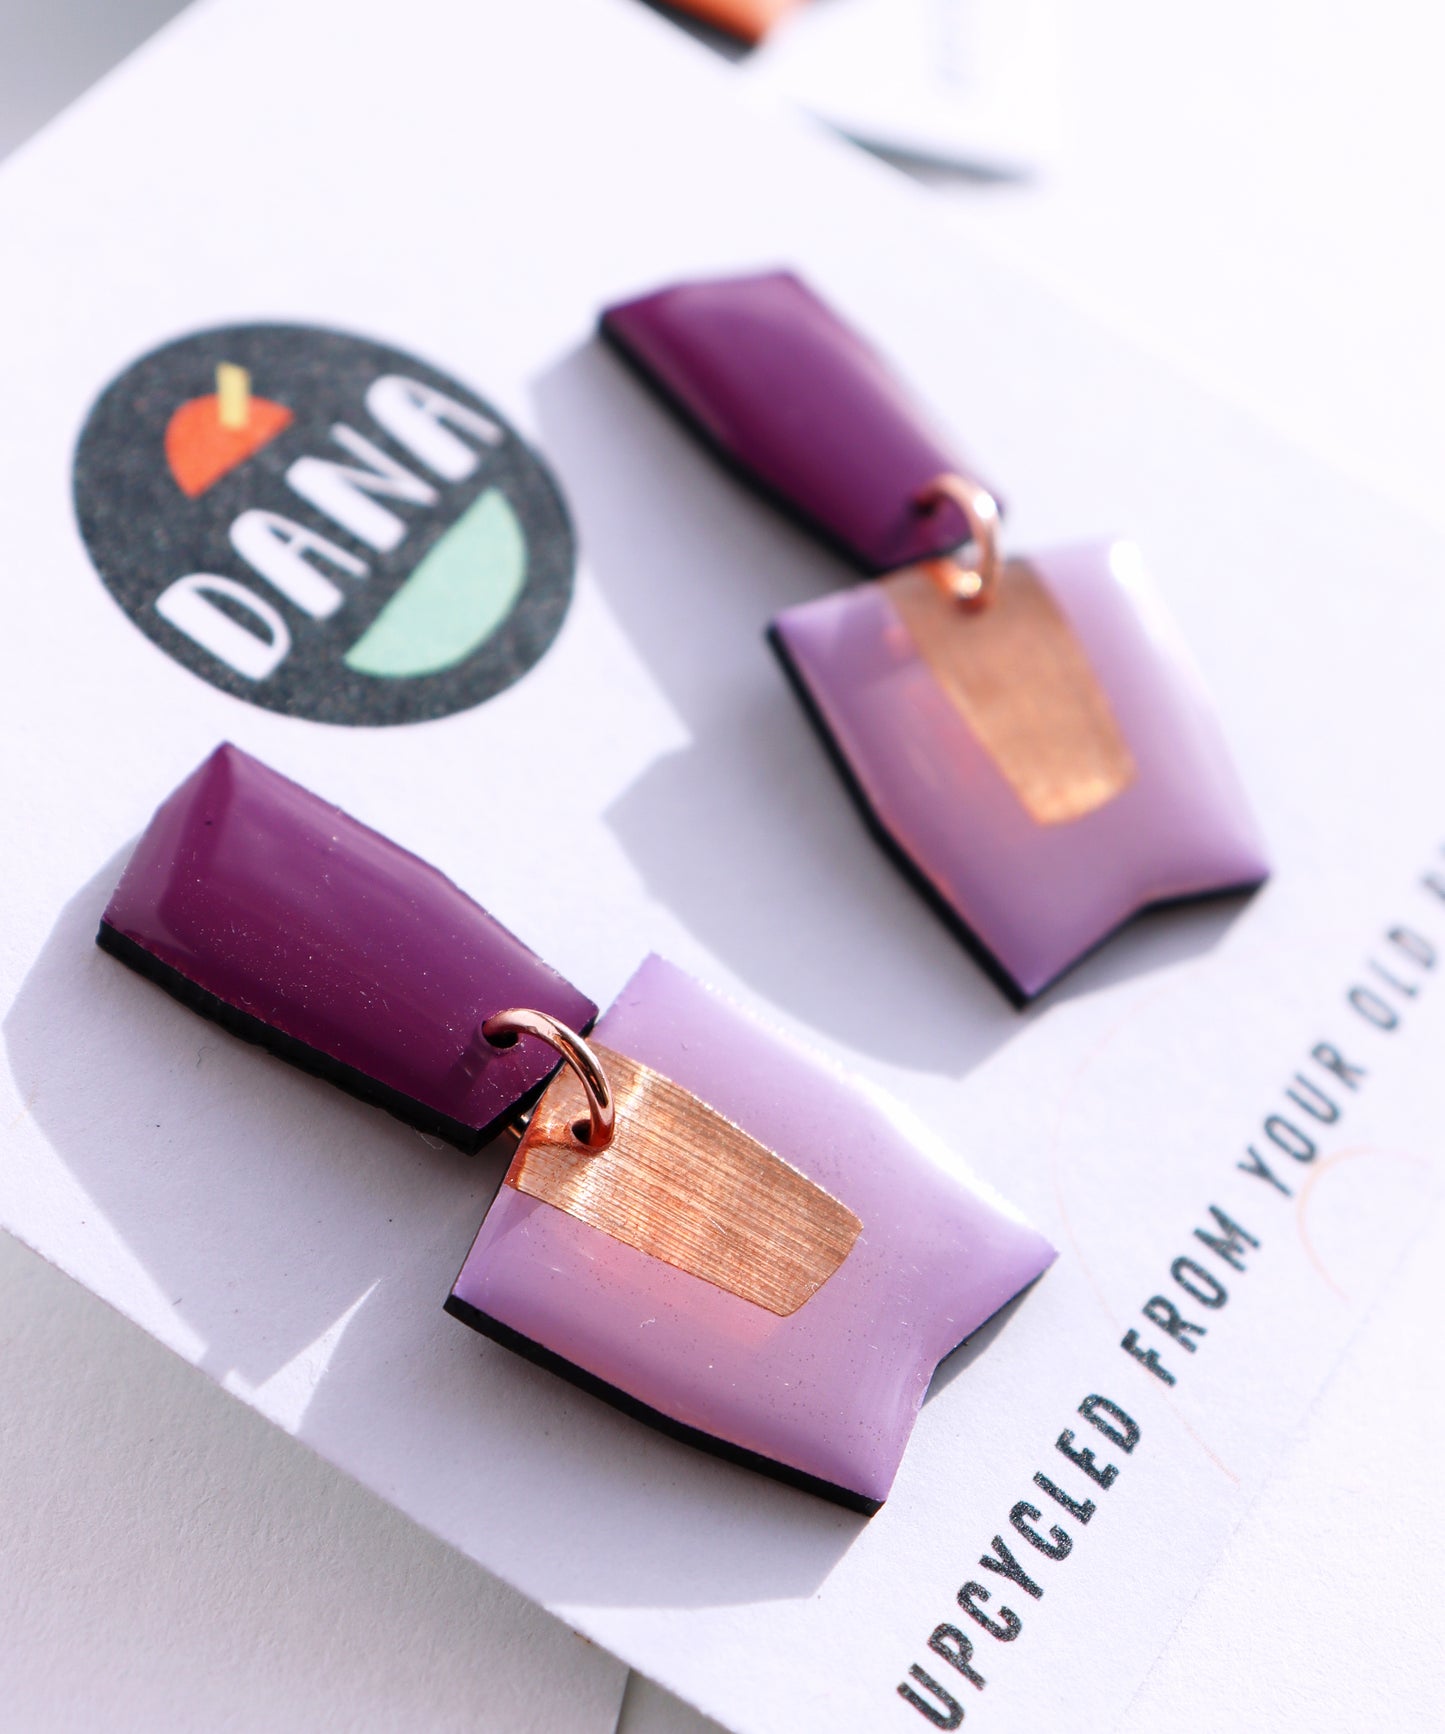 Connie no.2 / Modern geometric earrings in shades of purples with a warm pop of copper